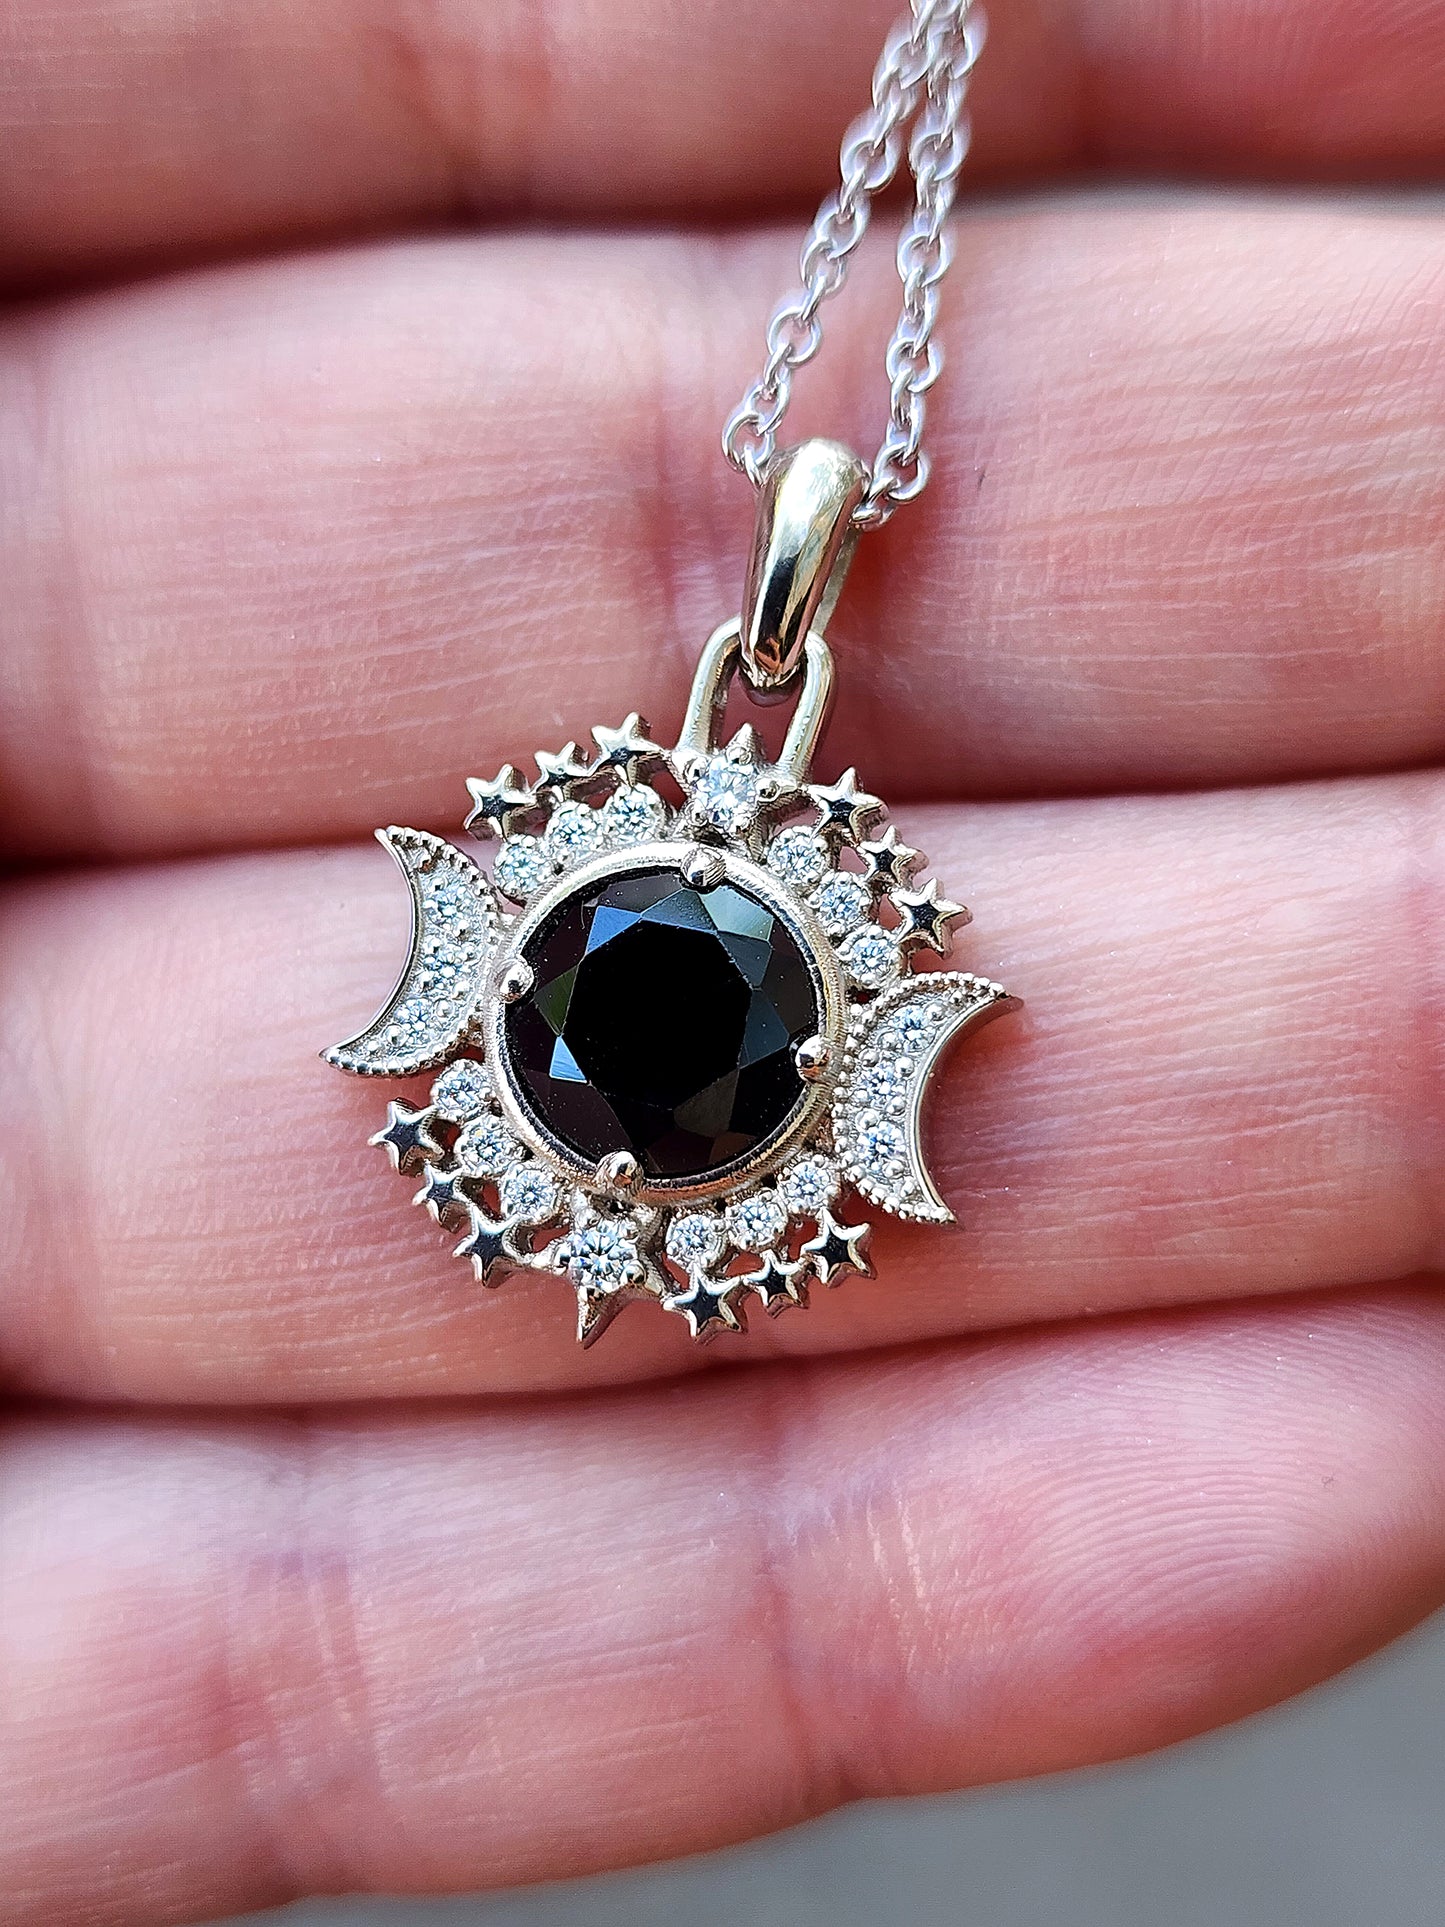 Gothic Black Spinel Pendant Serena Moon & Star Diamond Halo Necklace - 14k Gold, Delicate Witchy Celestial Necklace Goth Halloween